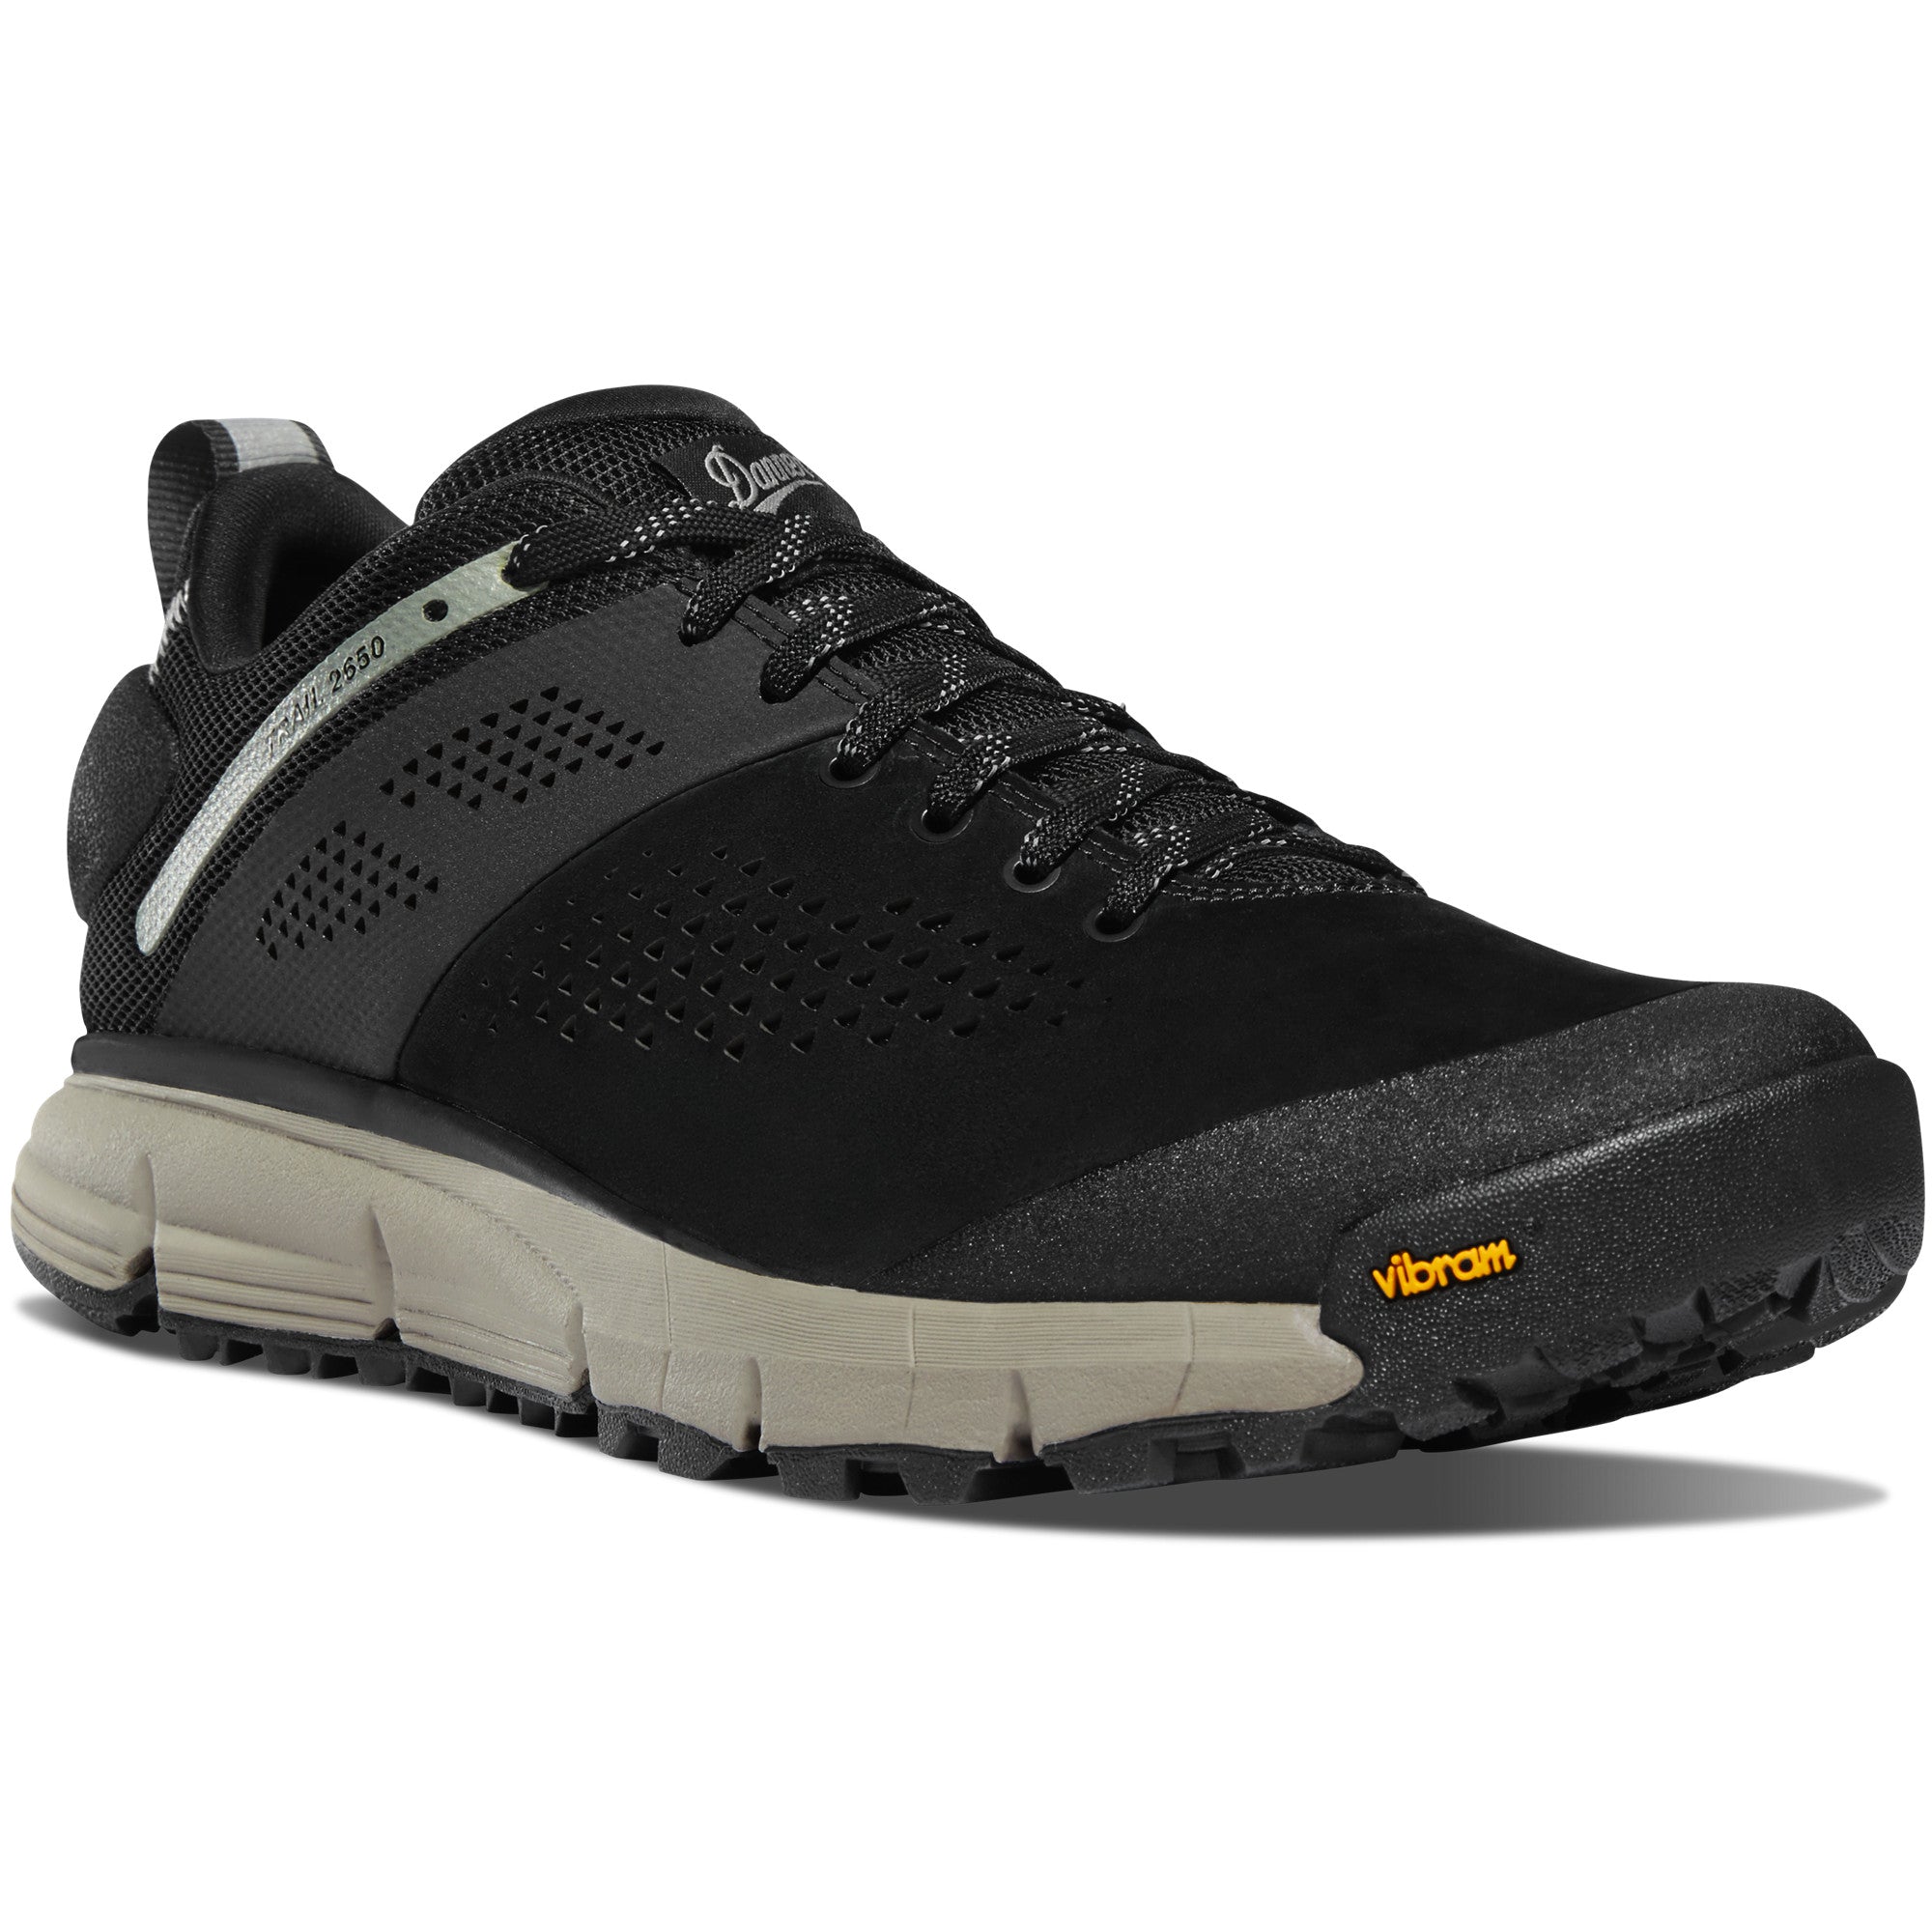 Danner Women's Trail 2650 3" Hiking Shoe in Black/Gray from the side